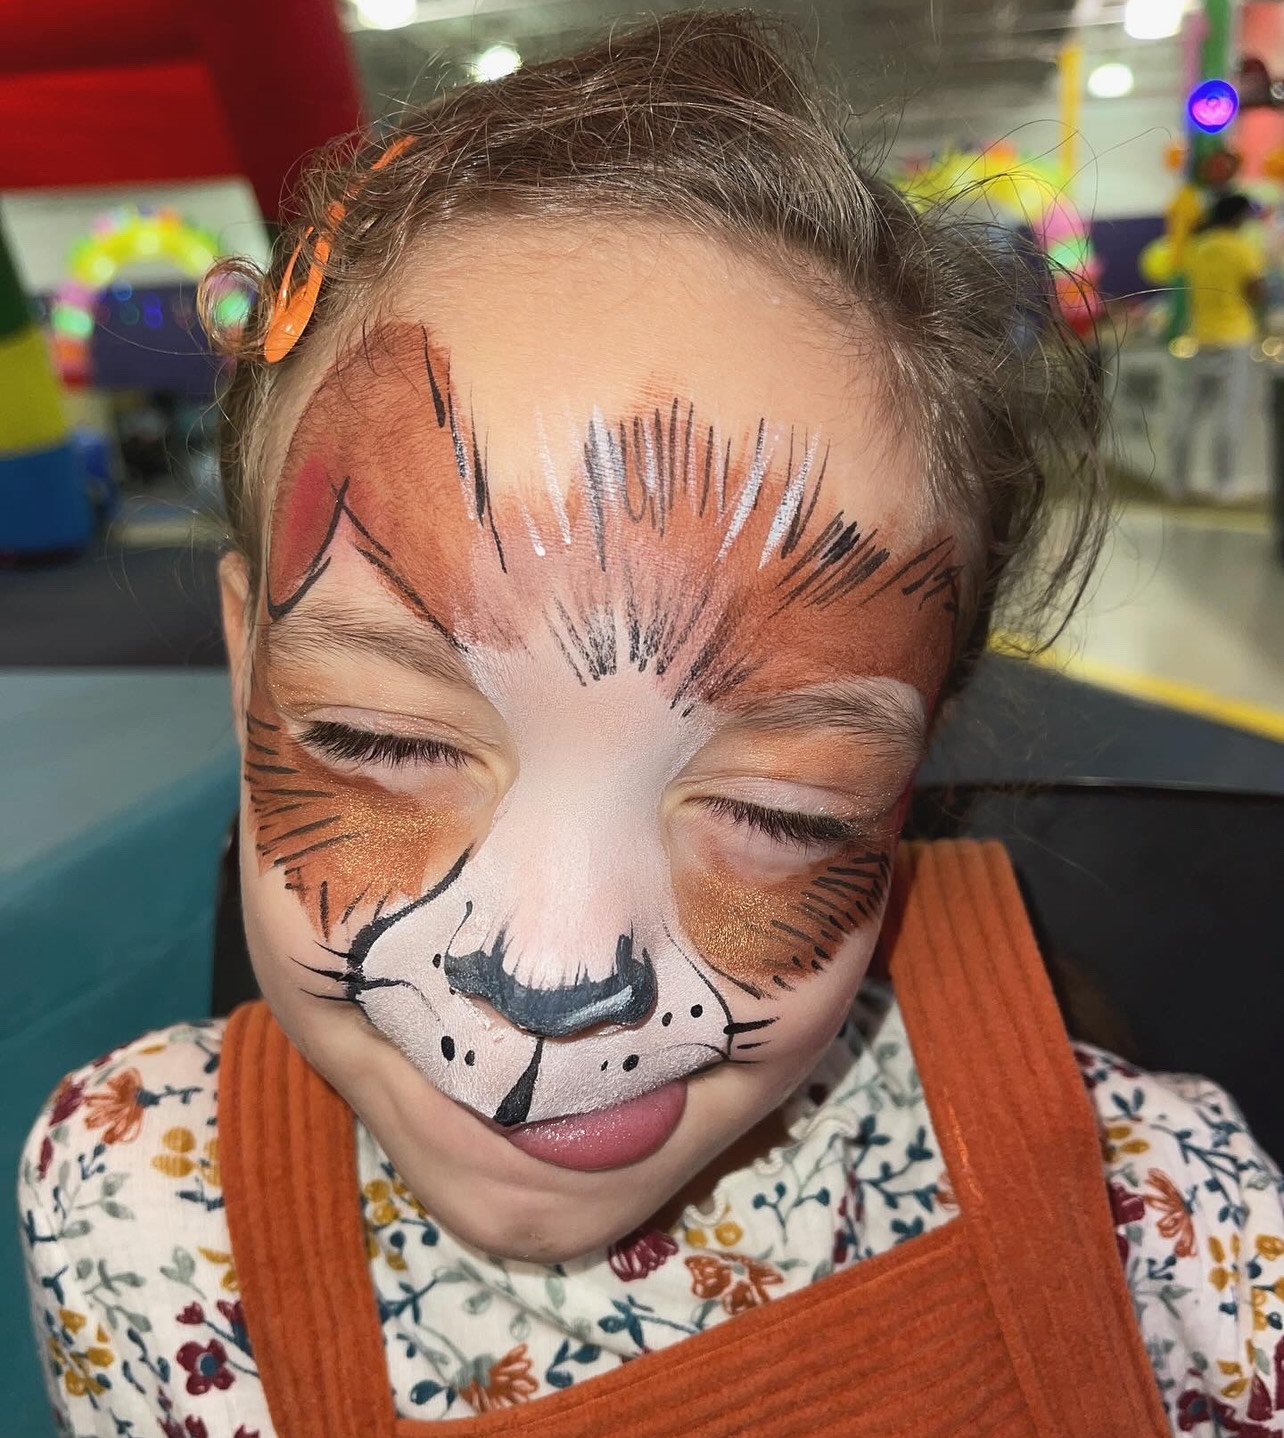  A child with their face painted in a woodland animal pattern 